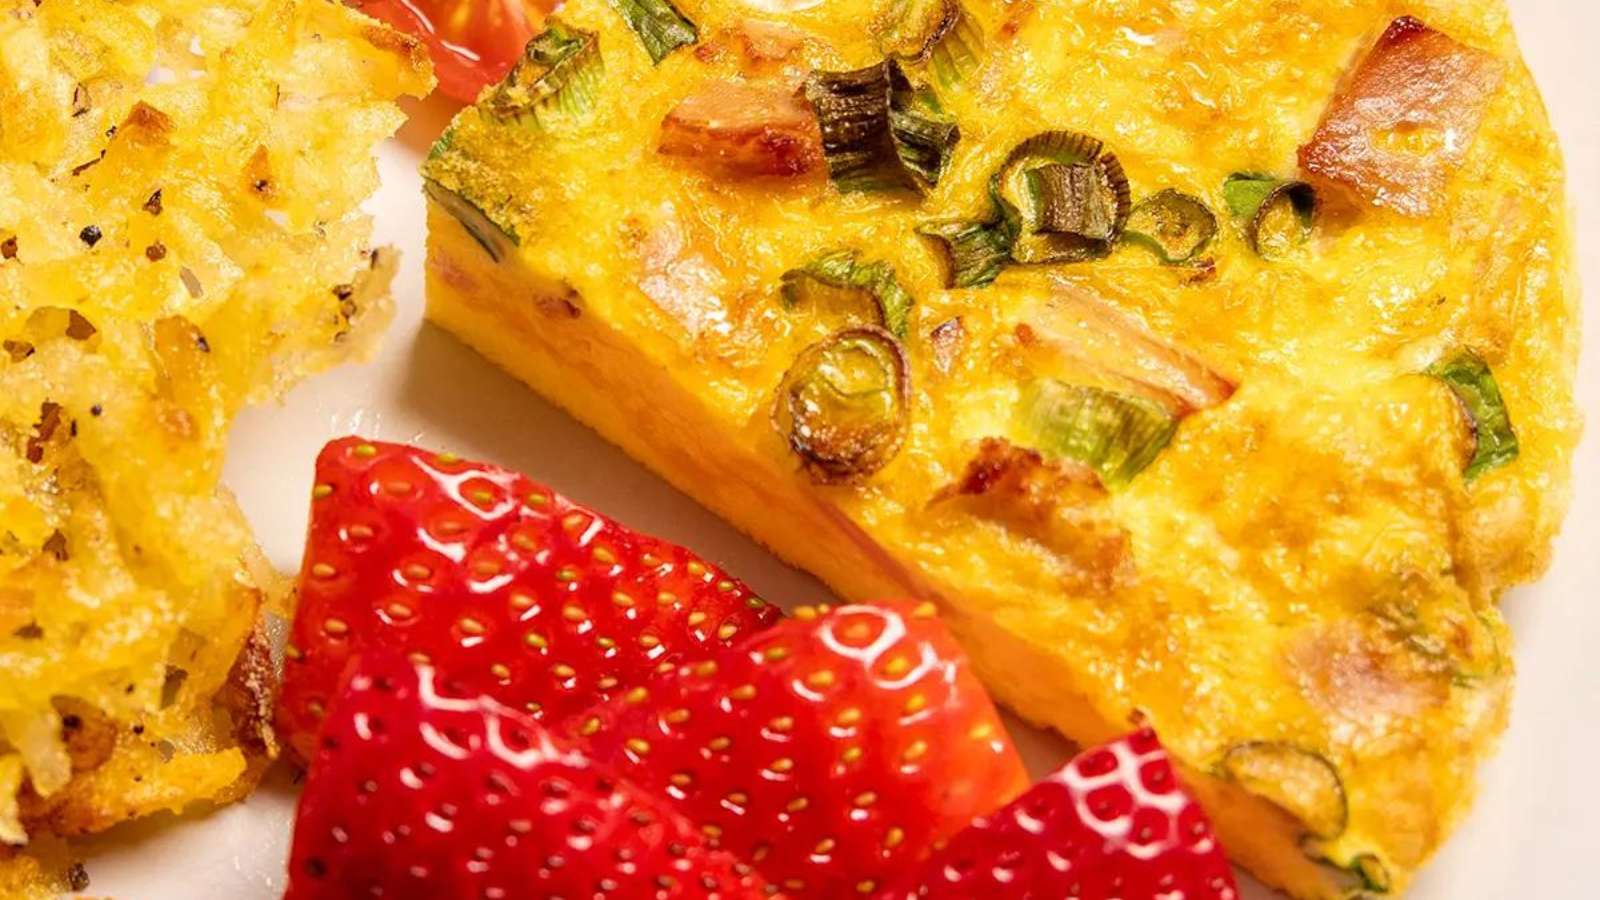 A slice of quiche and strawberries on a plate.